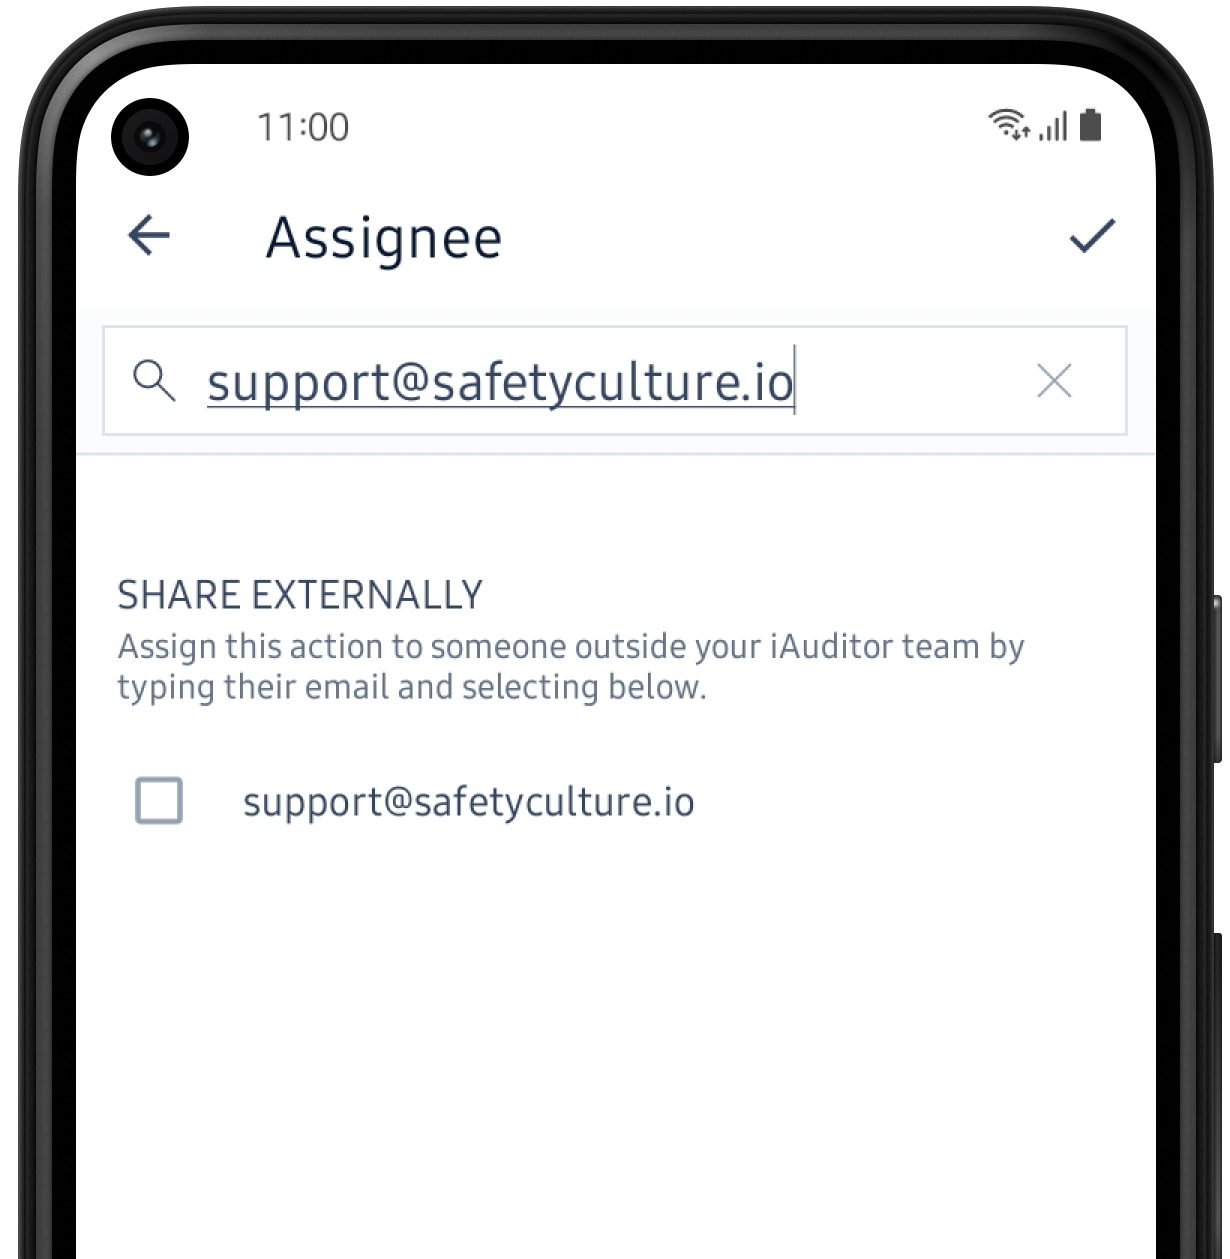 Assign an action externally via the Android mobile app.